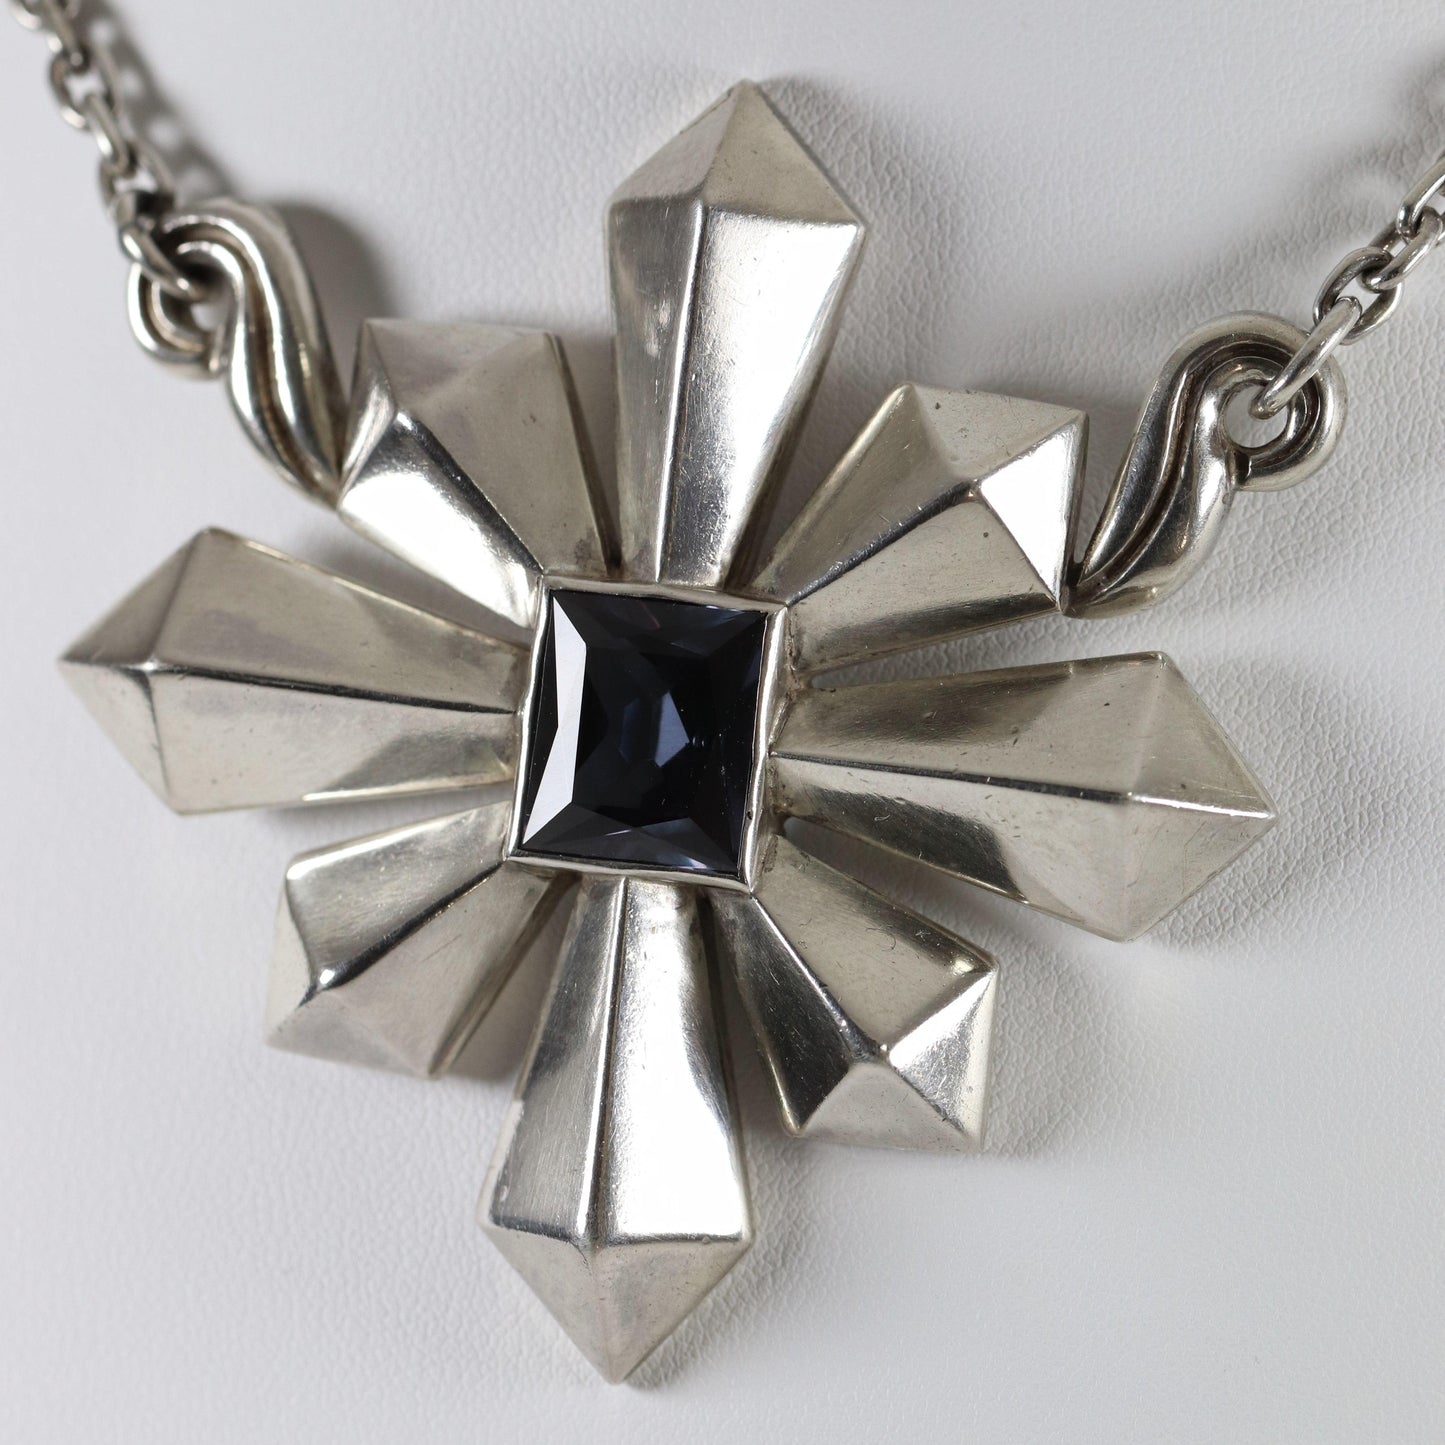 Vintage Antonio Pineda Taxco Silver Mexican Jewelry | Large Sapphire Star Statement Necklace - Carmel Fine Silver Jewelry